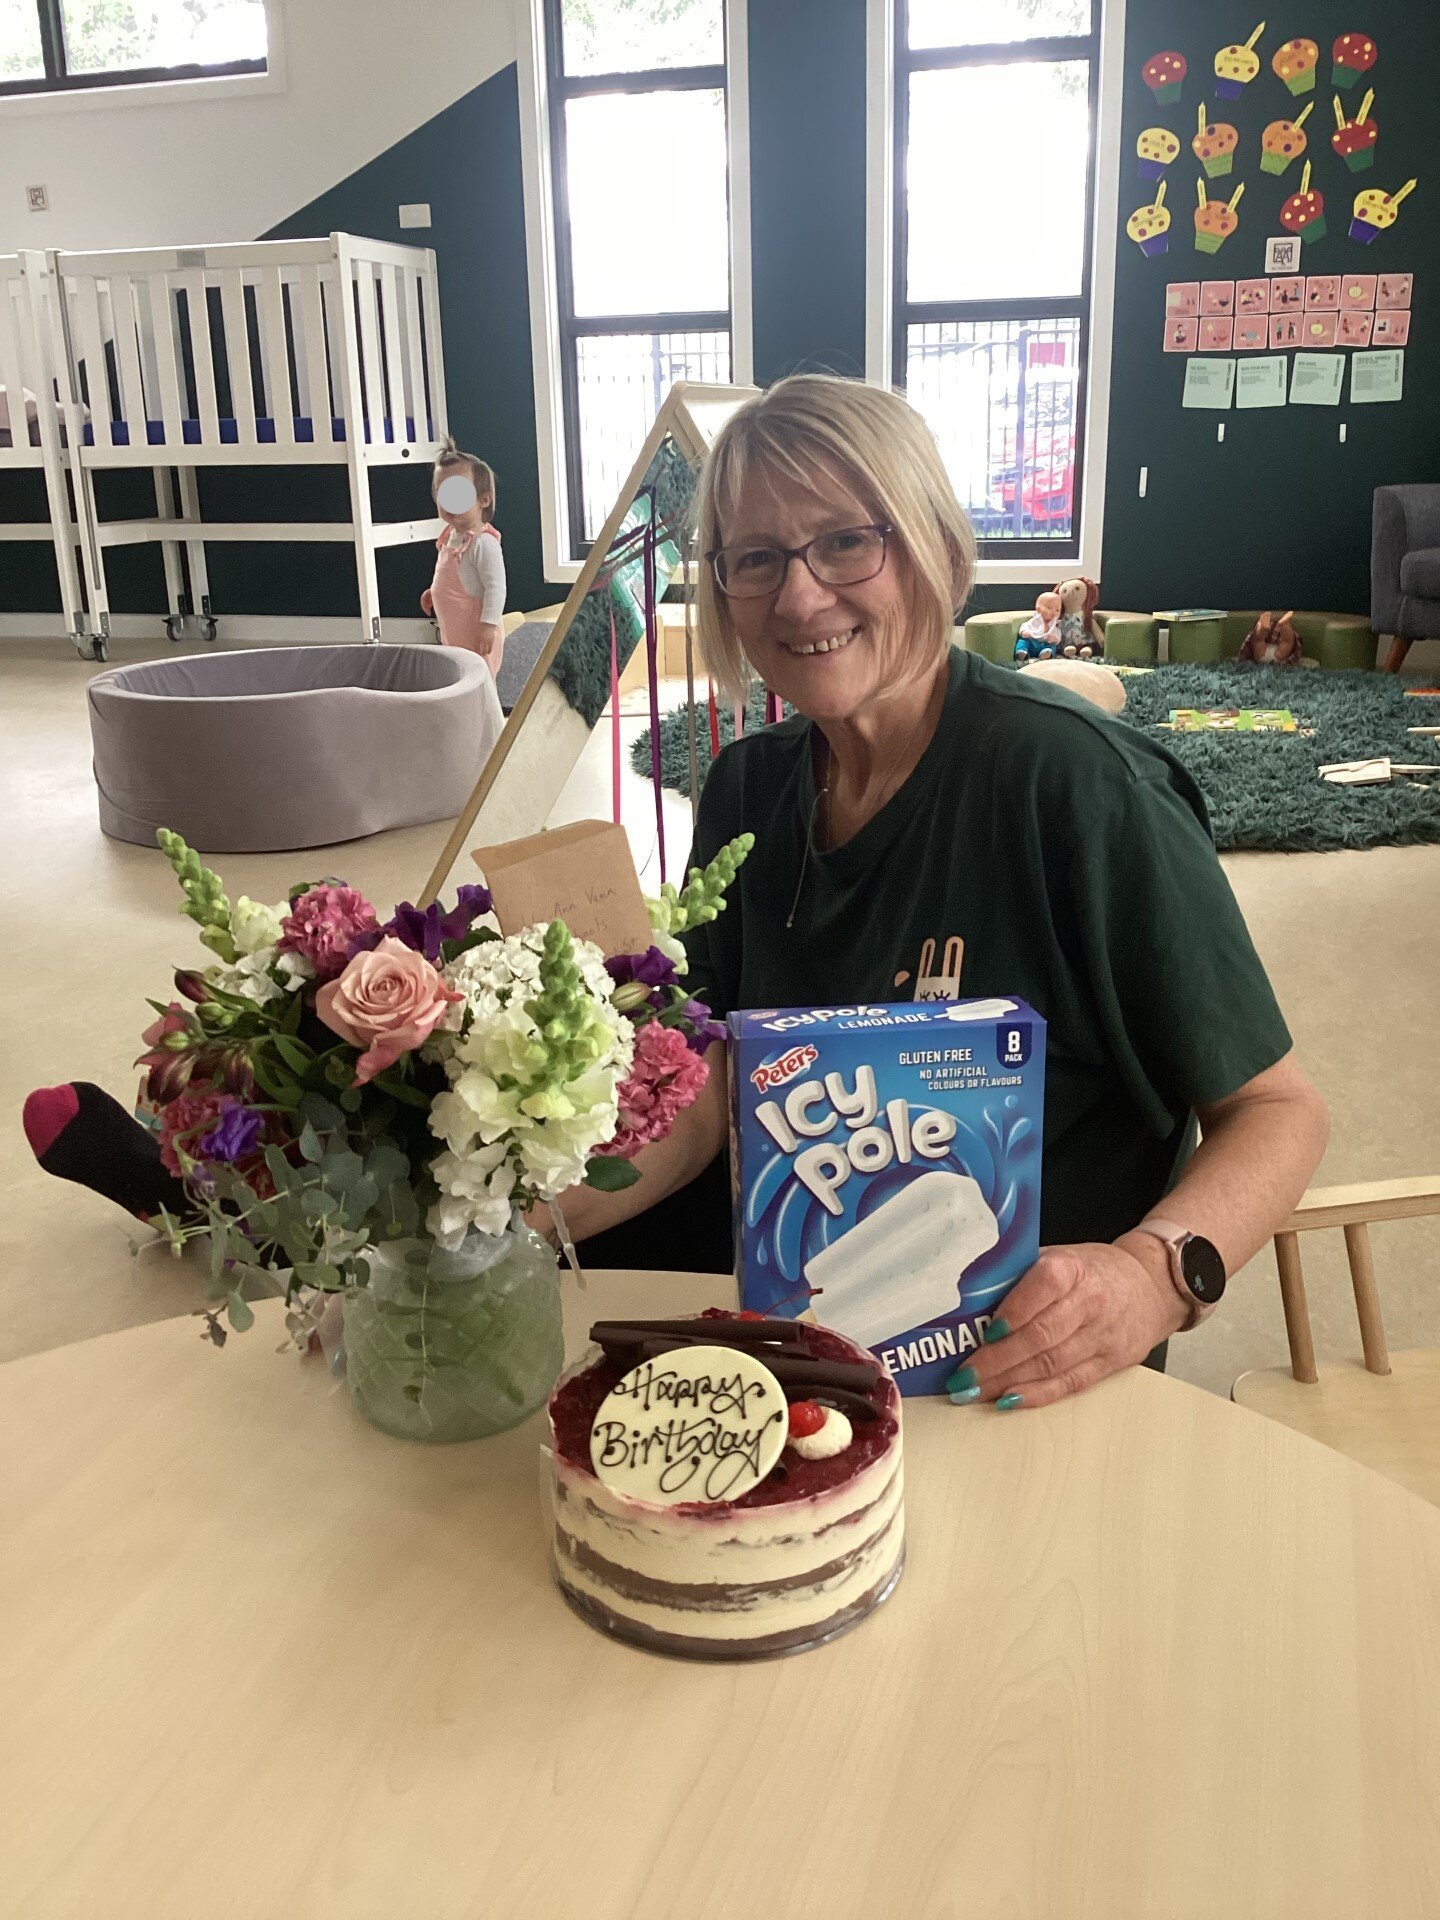 Huge Happy Birthday to our wonderful Educator Julie, who turns 60 today!  I don't know what we would do here at Hei Schools Ballarat Central, without our Mumma Julie, she looks after us all.  #heischoolsballaratcentral #heischoolsballarat